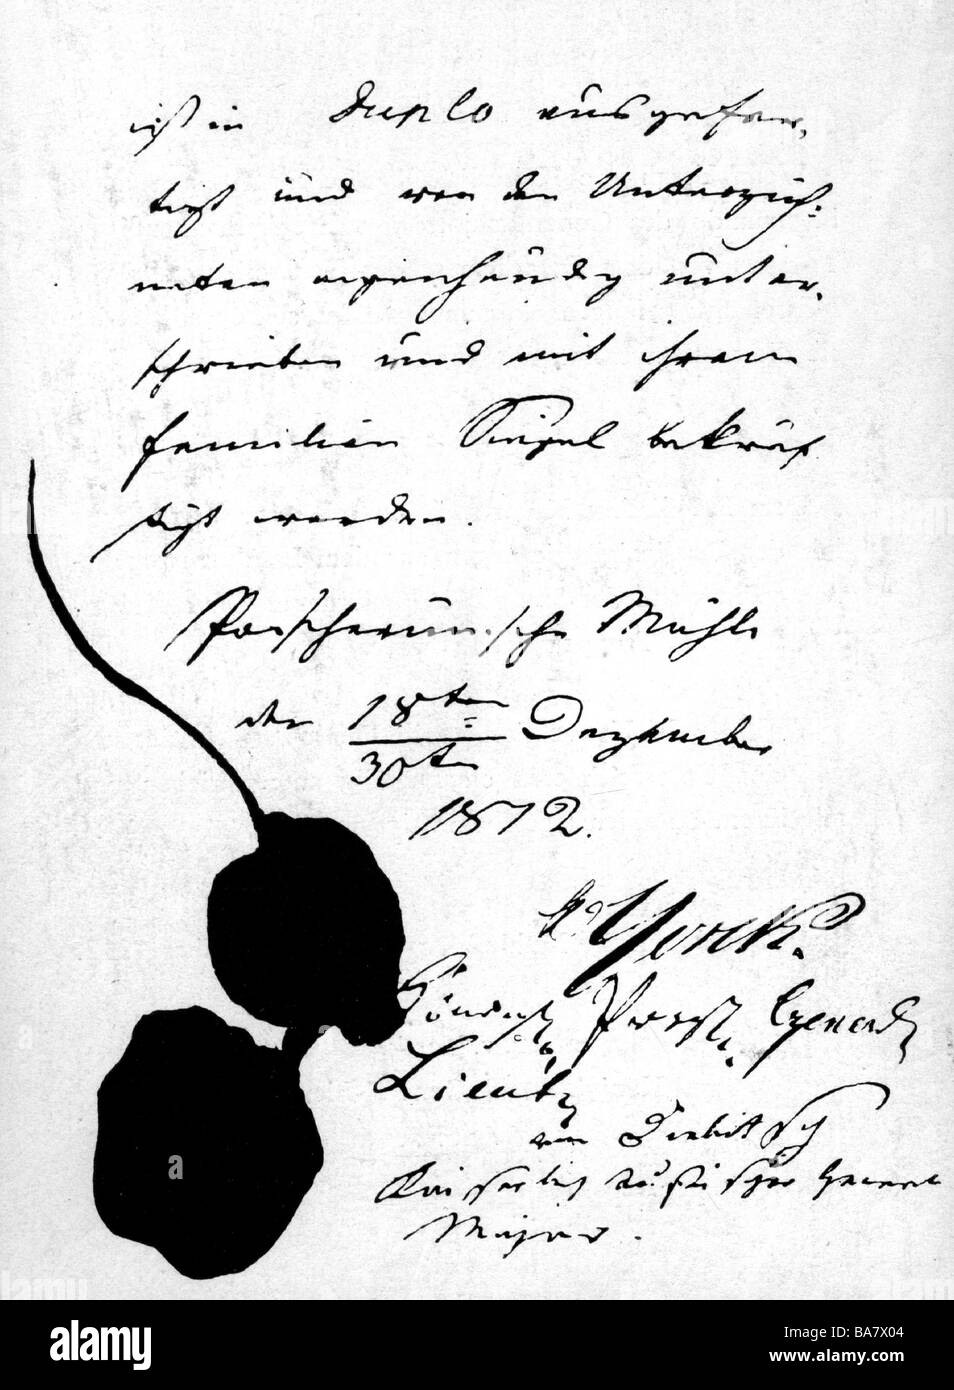 events, War of the Sixth Coalition 1812 - 1814, Convention of Tauroggen, 30.12.1812, document with signatures of Prussian general Johann Ludwig Yorck von Wartenburg and Russian field marshal Hans Karl von Diebitsch, Russia, Russian campaign, Napoleonic Wars, Ivan Ivanovich Diebitsch-Sabalkanski, Sabalkanski, Prussia, Napoleonic Wars, armistice, 19th century, historic, historical, Stock Photo